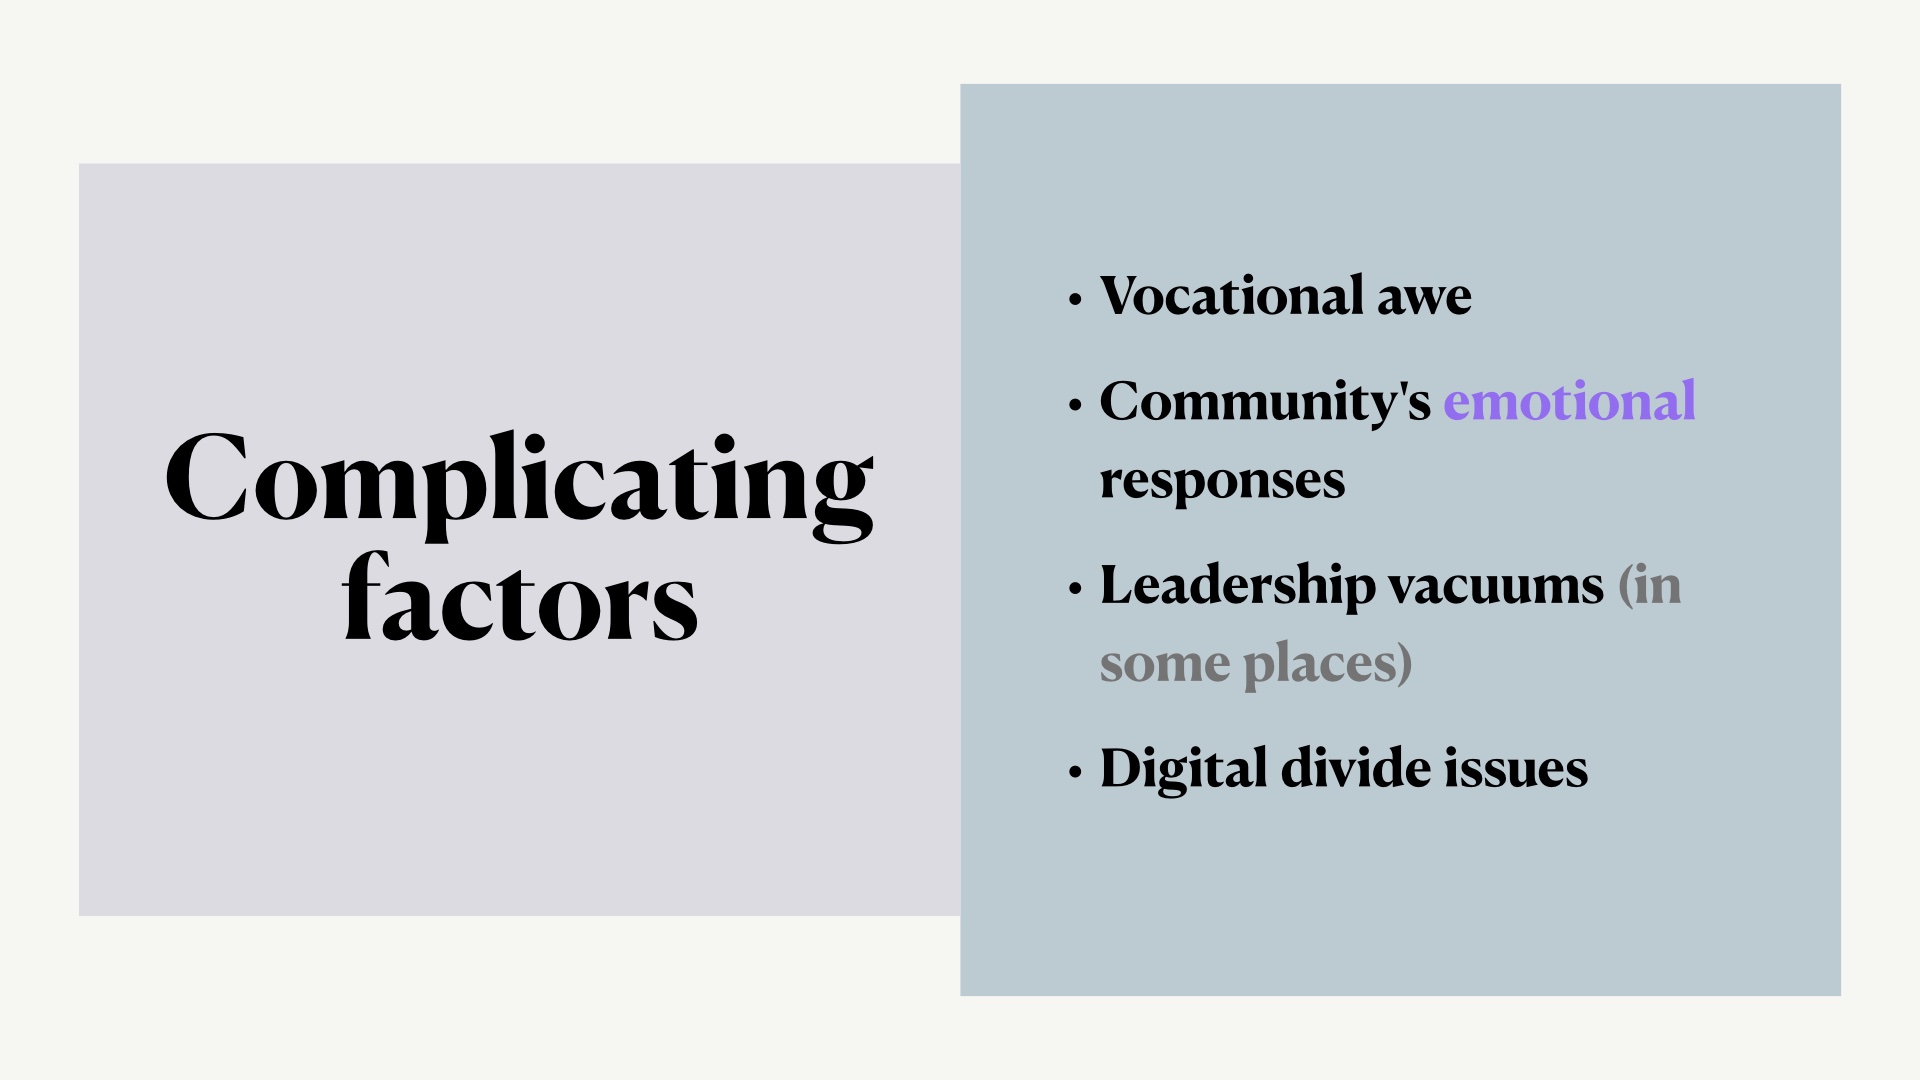 [caption: complicating factors: Vocational awe; Community's emotional responses; Leadership vacuums (in some places); Digital divide issues]